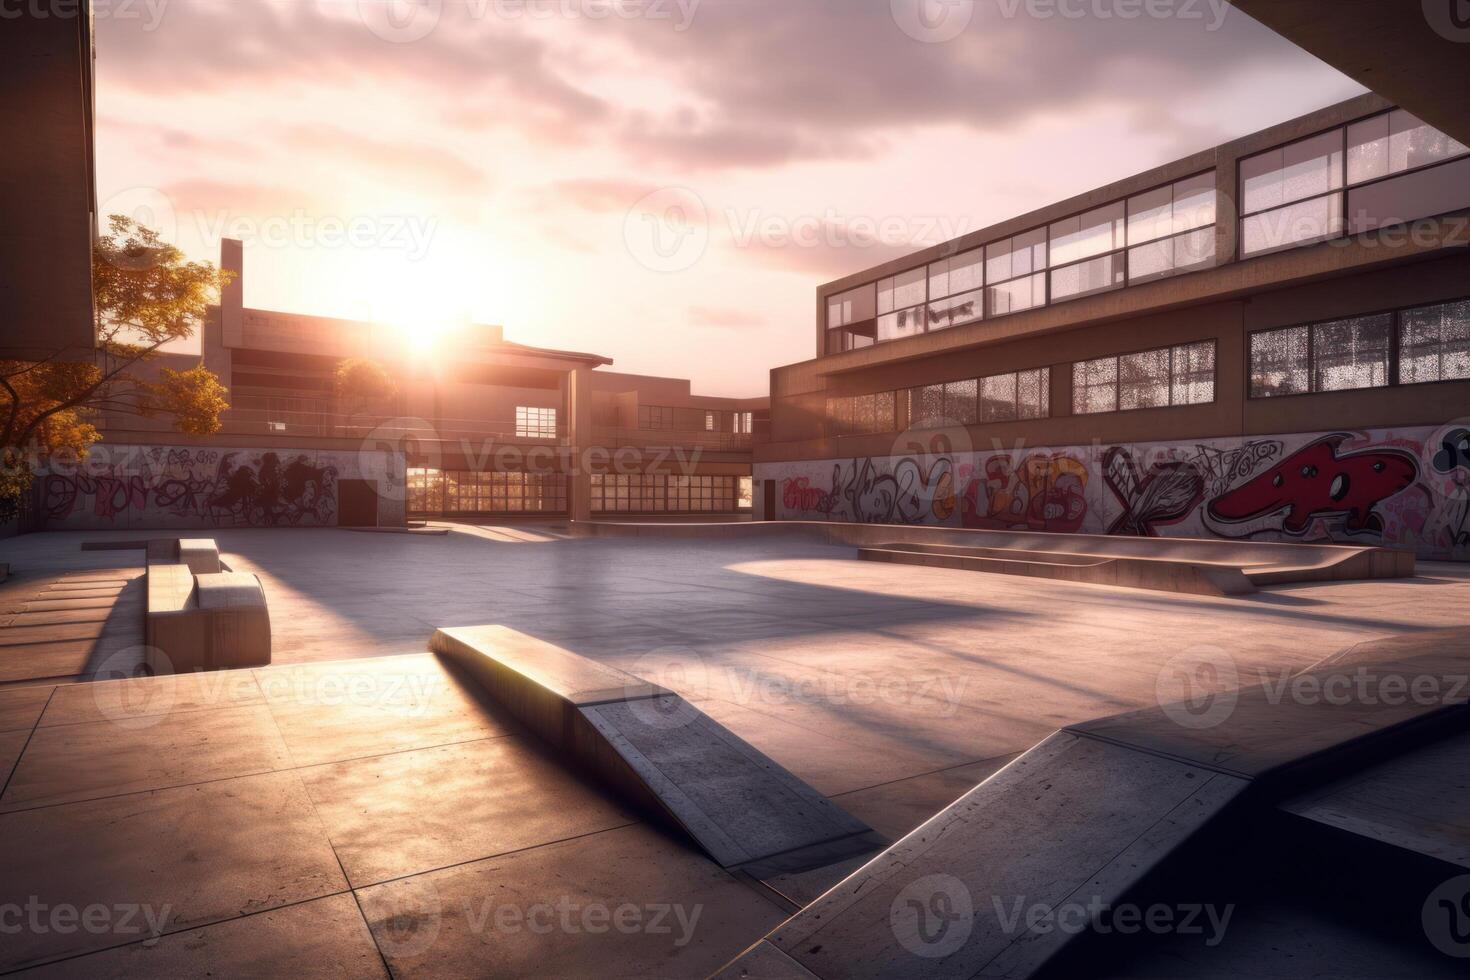 Hyperrealism skatepark view in the city background photo